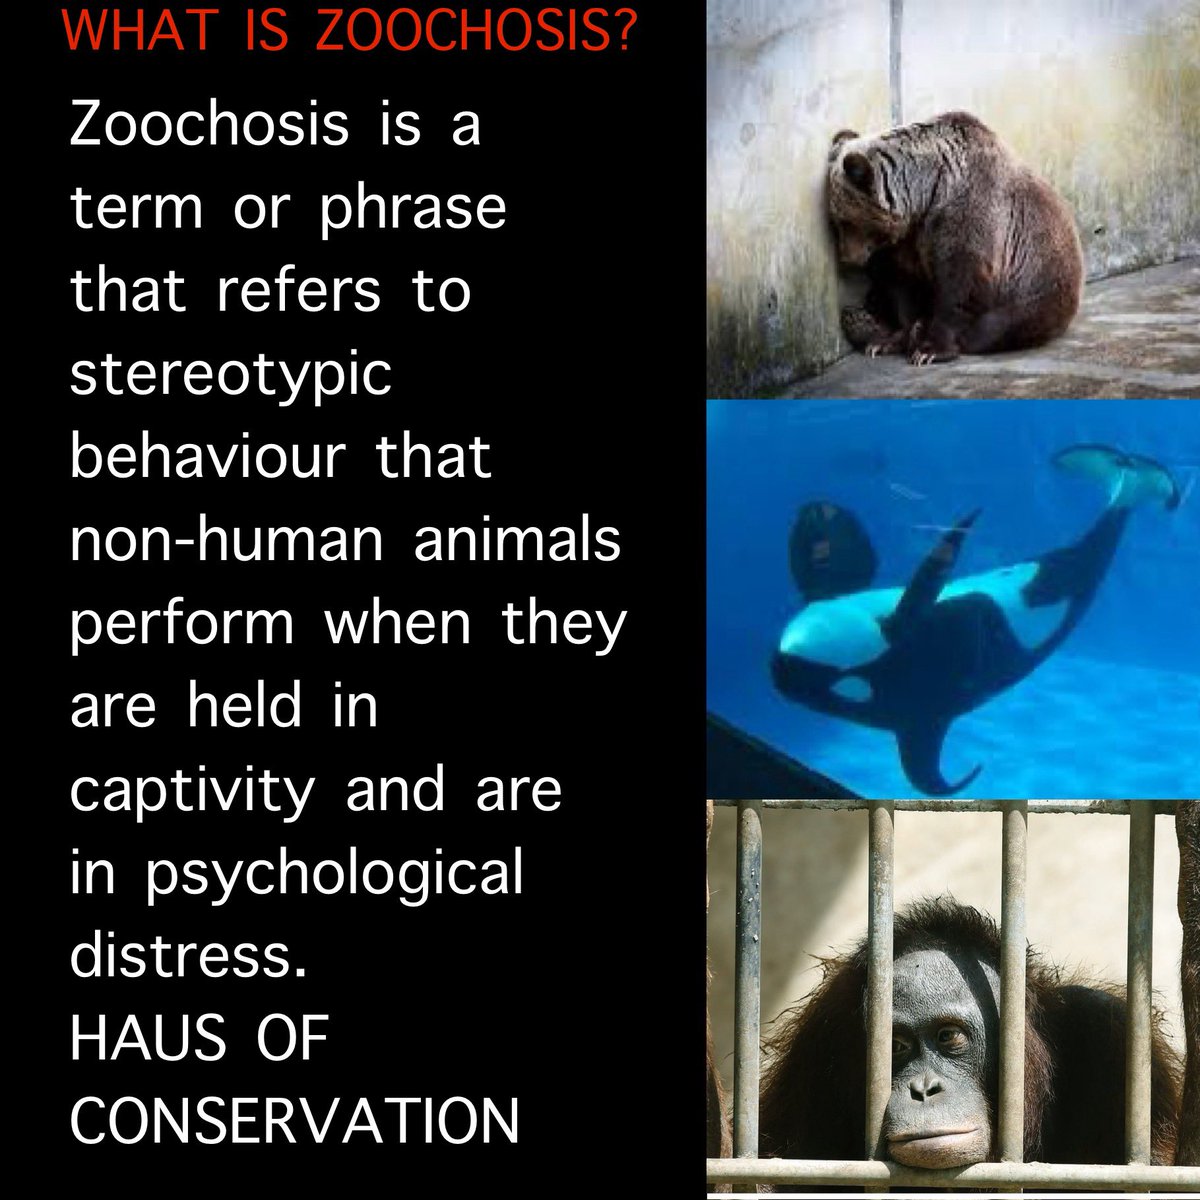 Ending captivity is just one part of eradicating speciesism which helps to end all forms of oppression 🙏🐾💚
 #wellbeingforalllife #CaptivityKills #captivity #speciesism #endspeciesism #animalrights #zoo #zoos #conservationeducation #EducationForAll #zoochosis